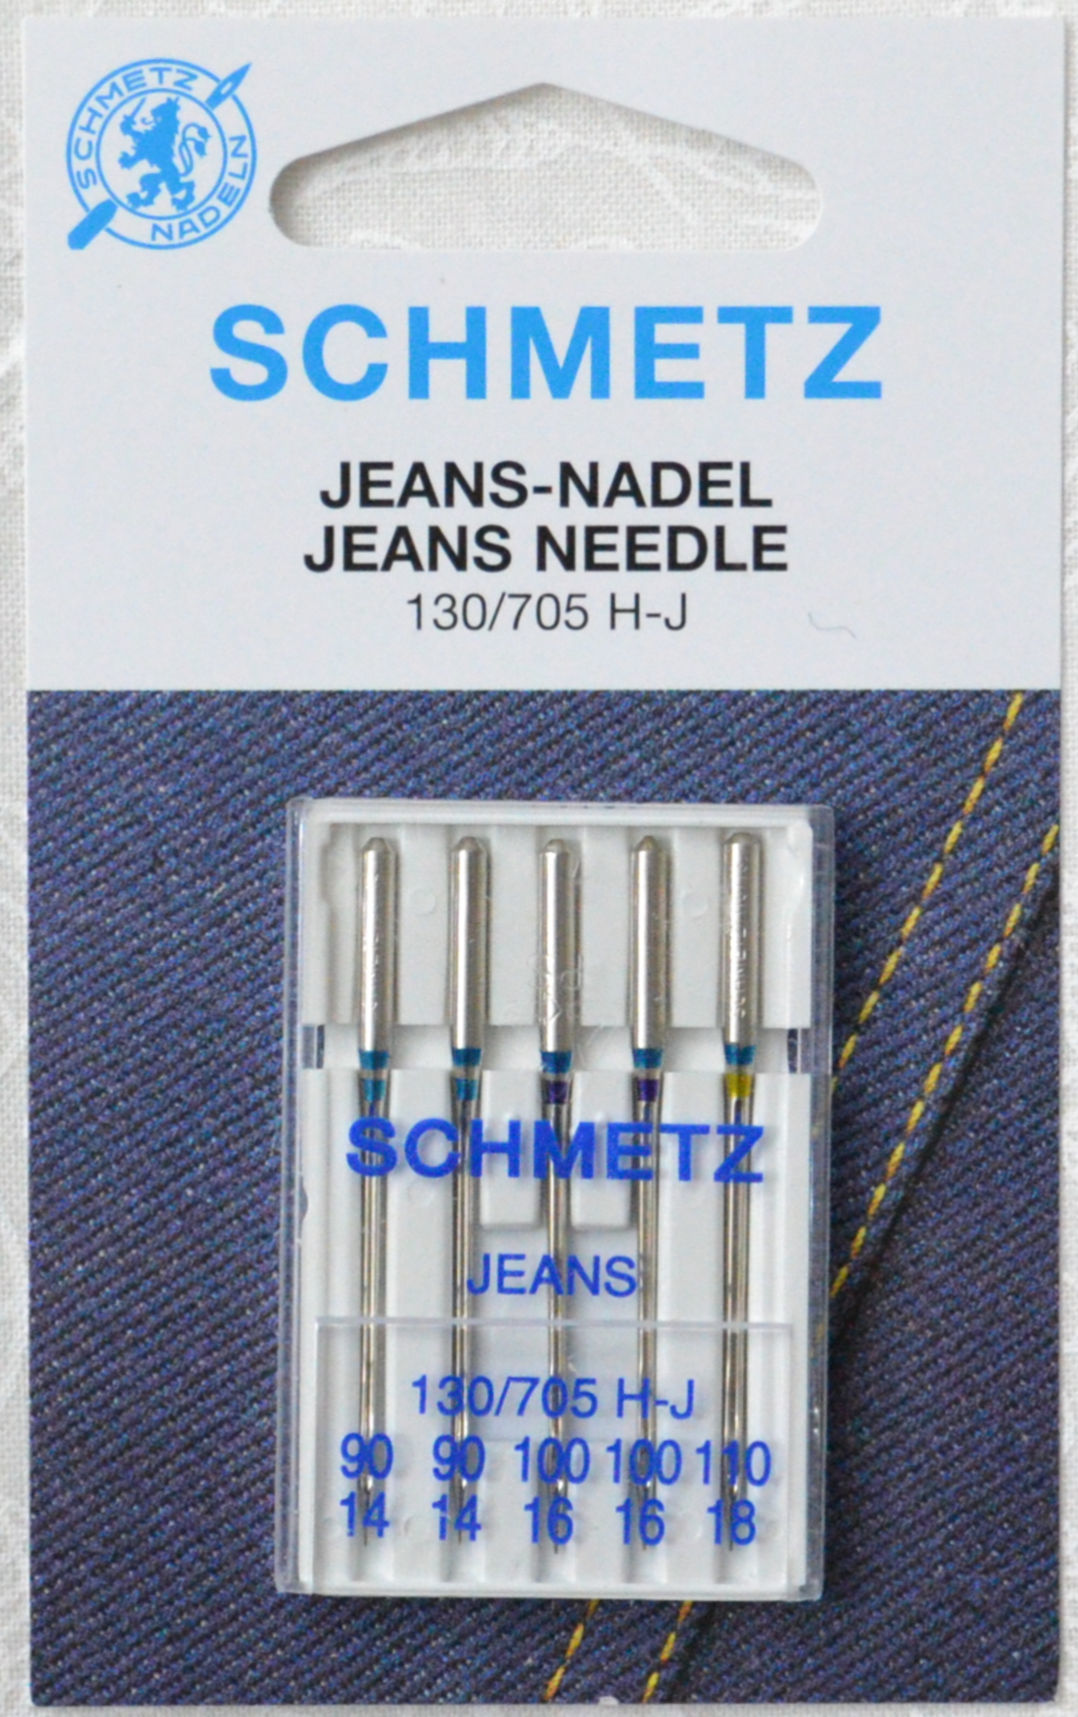 50 Schmetz Universal Sewing Machine Needles - Assorted Sizes - Box of 5  Cards